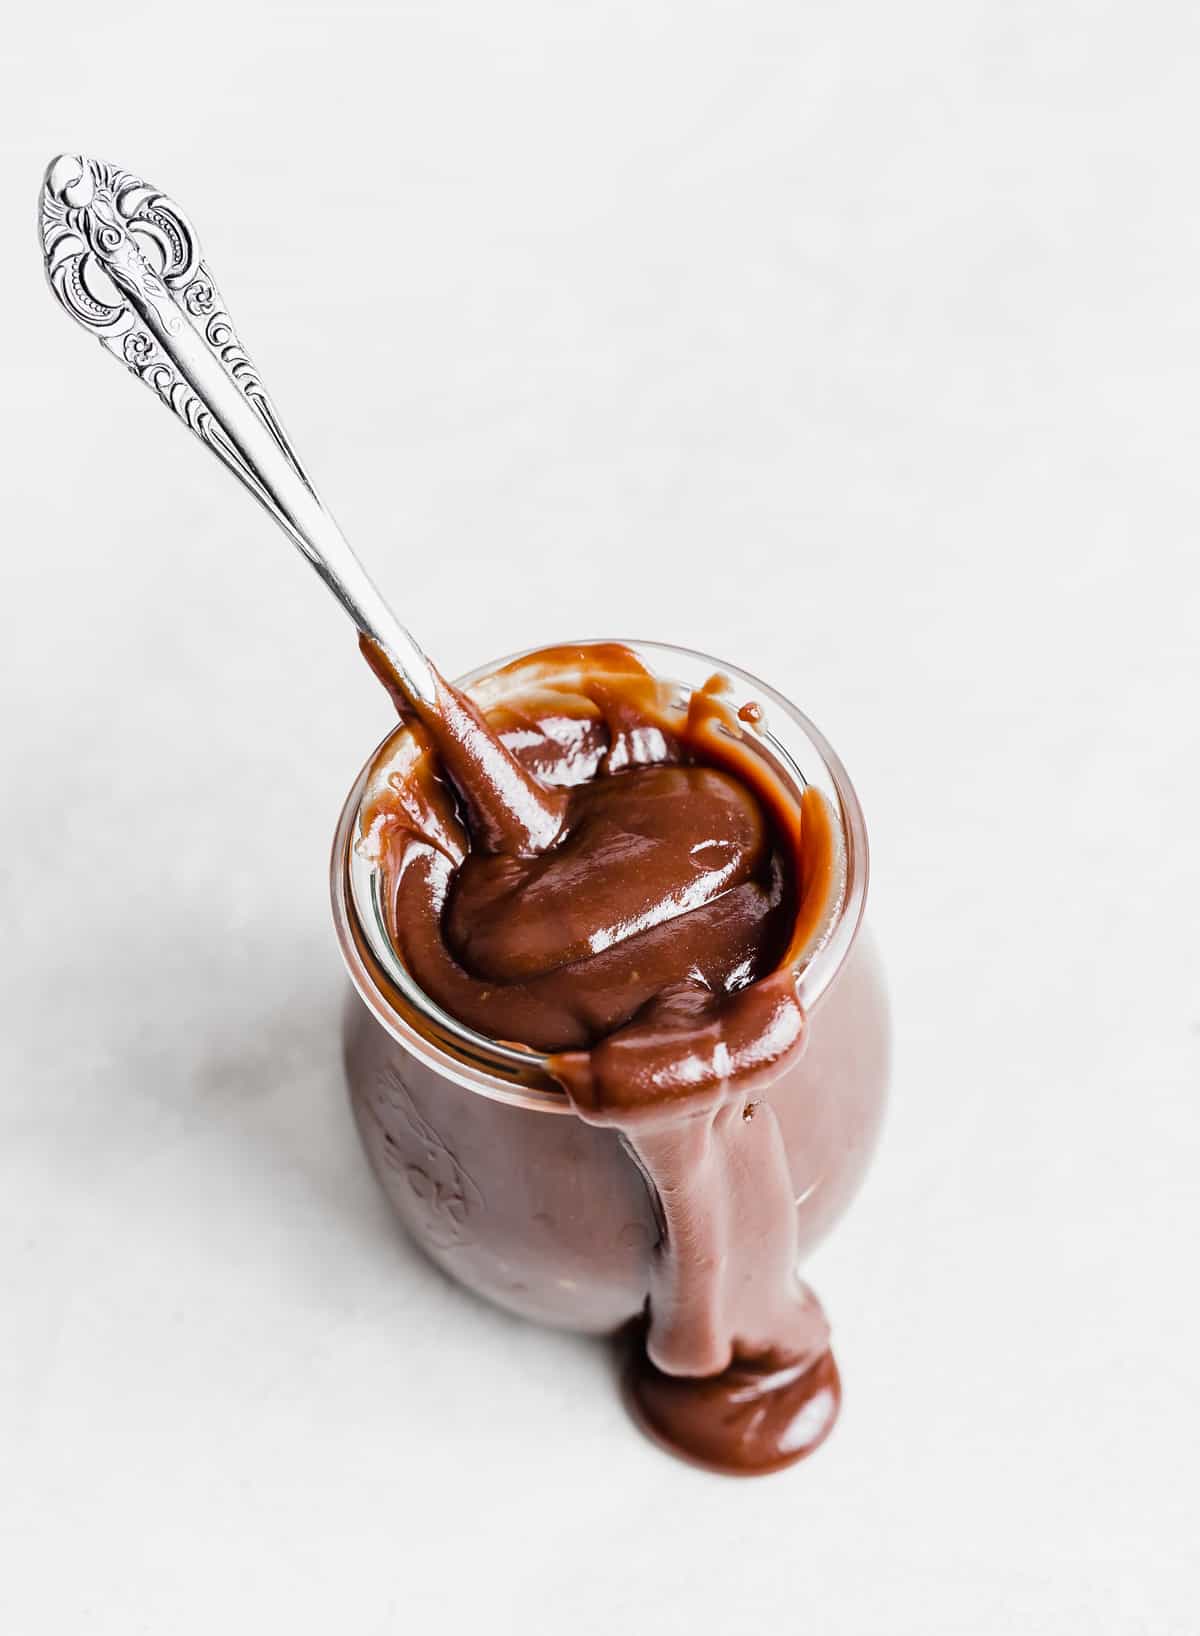 Old fashioned Hot Fudge Sauce in a glass jar on a white background. 